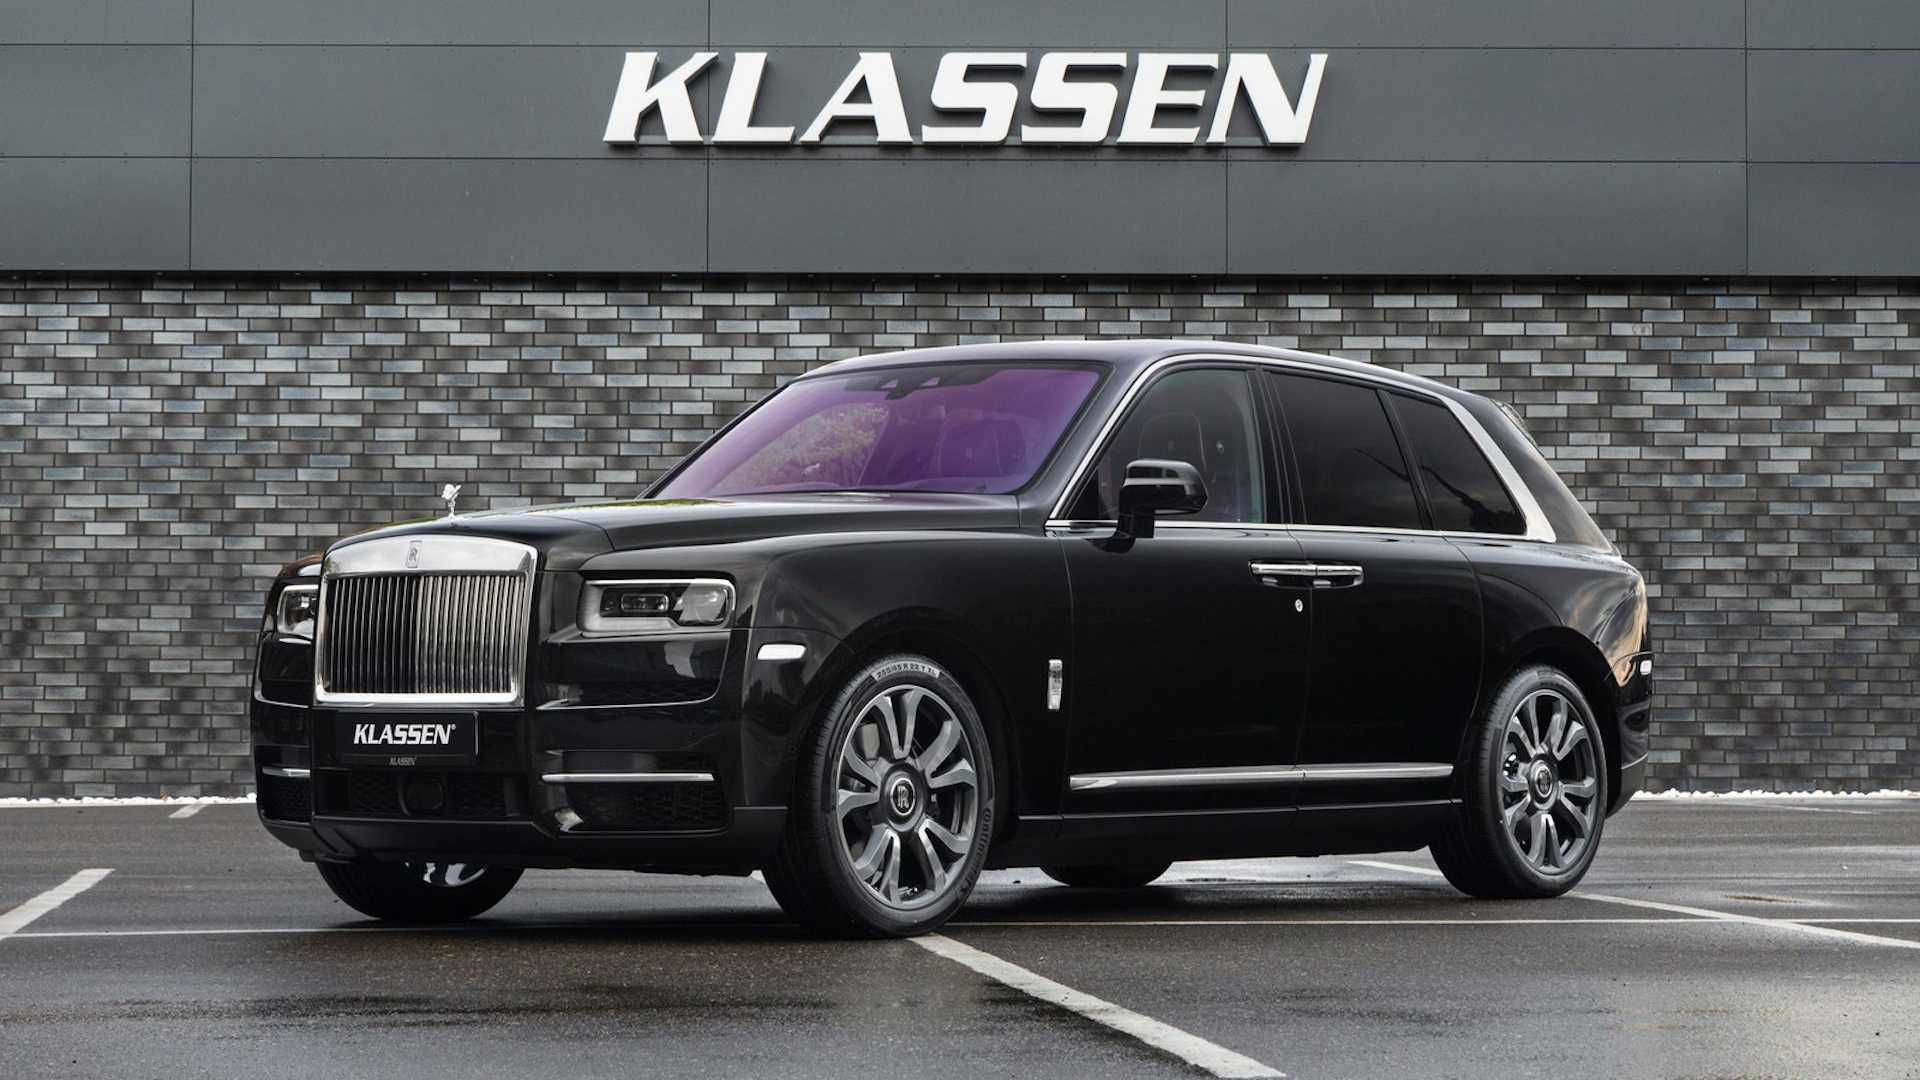 bao michael jordan surprised the world when he gifted the luxury car rolls royce cullinan rs to congratulate his teammate on becoming an nba legend 65395e326cae5 Michael Jordan Surprised The World When He Gifted The Luxury Car Rolls-royce Cullinan Rs To Congratulate His Teammate On Becoming An Nba Legend.